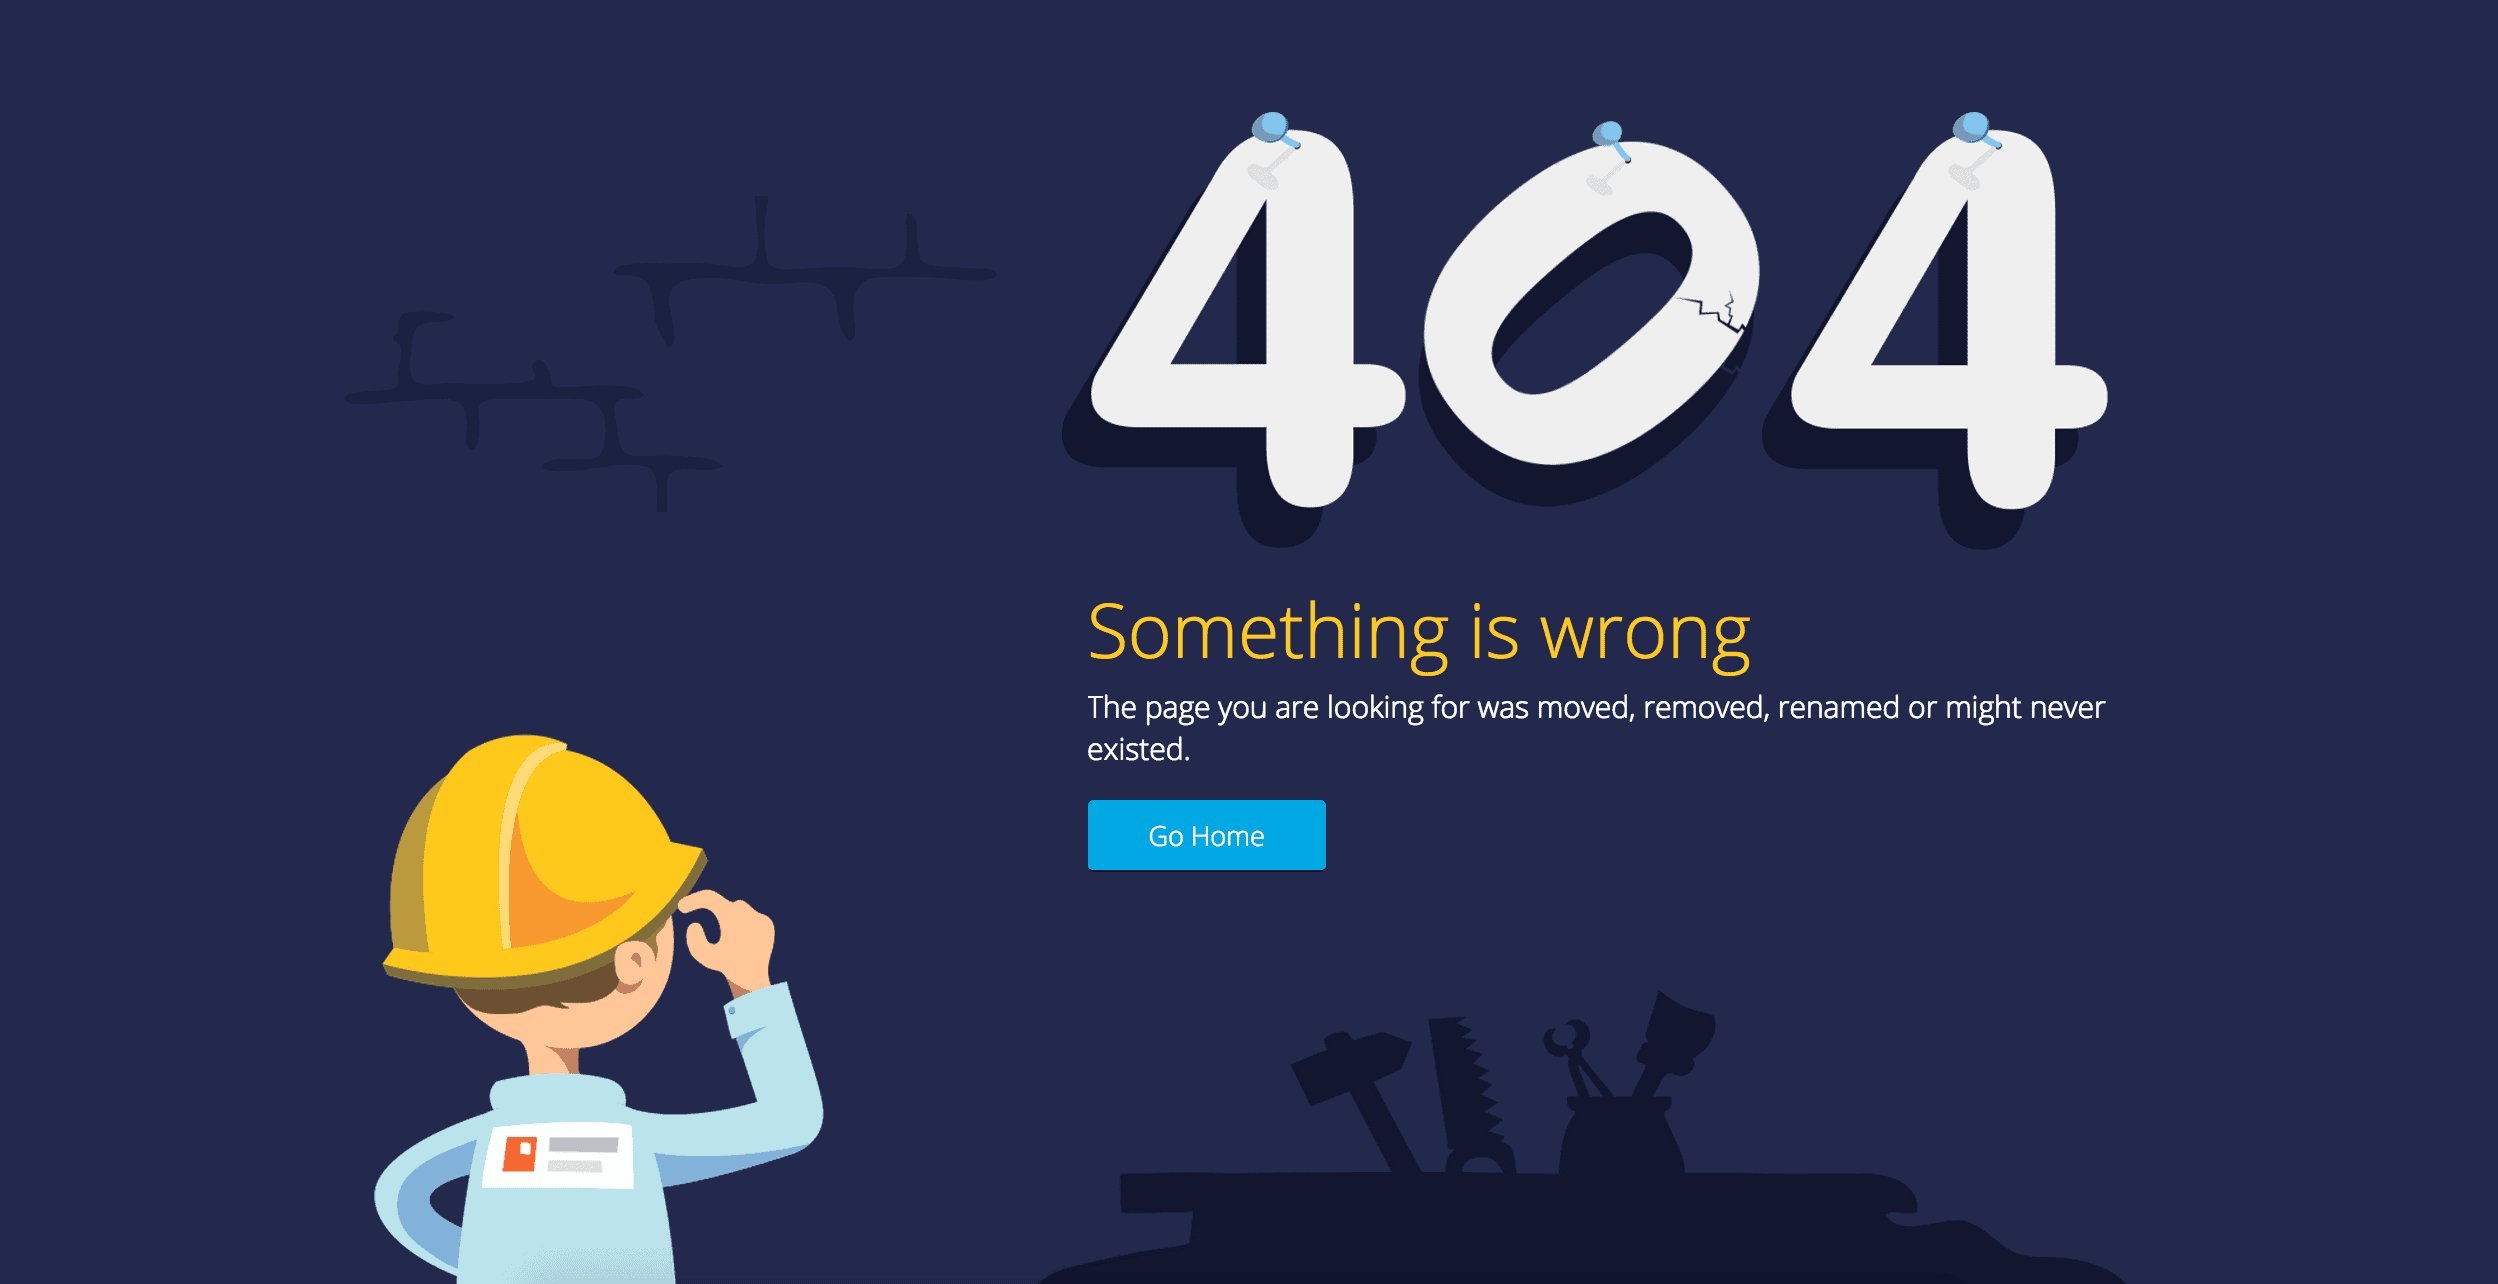 how to fix 404 not found